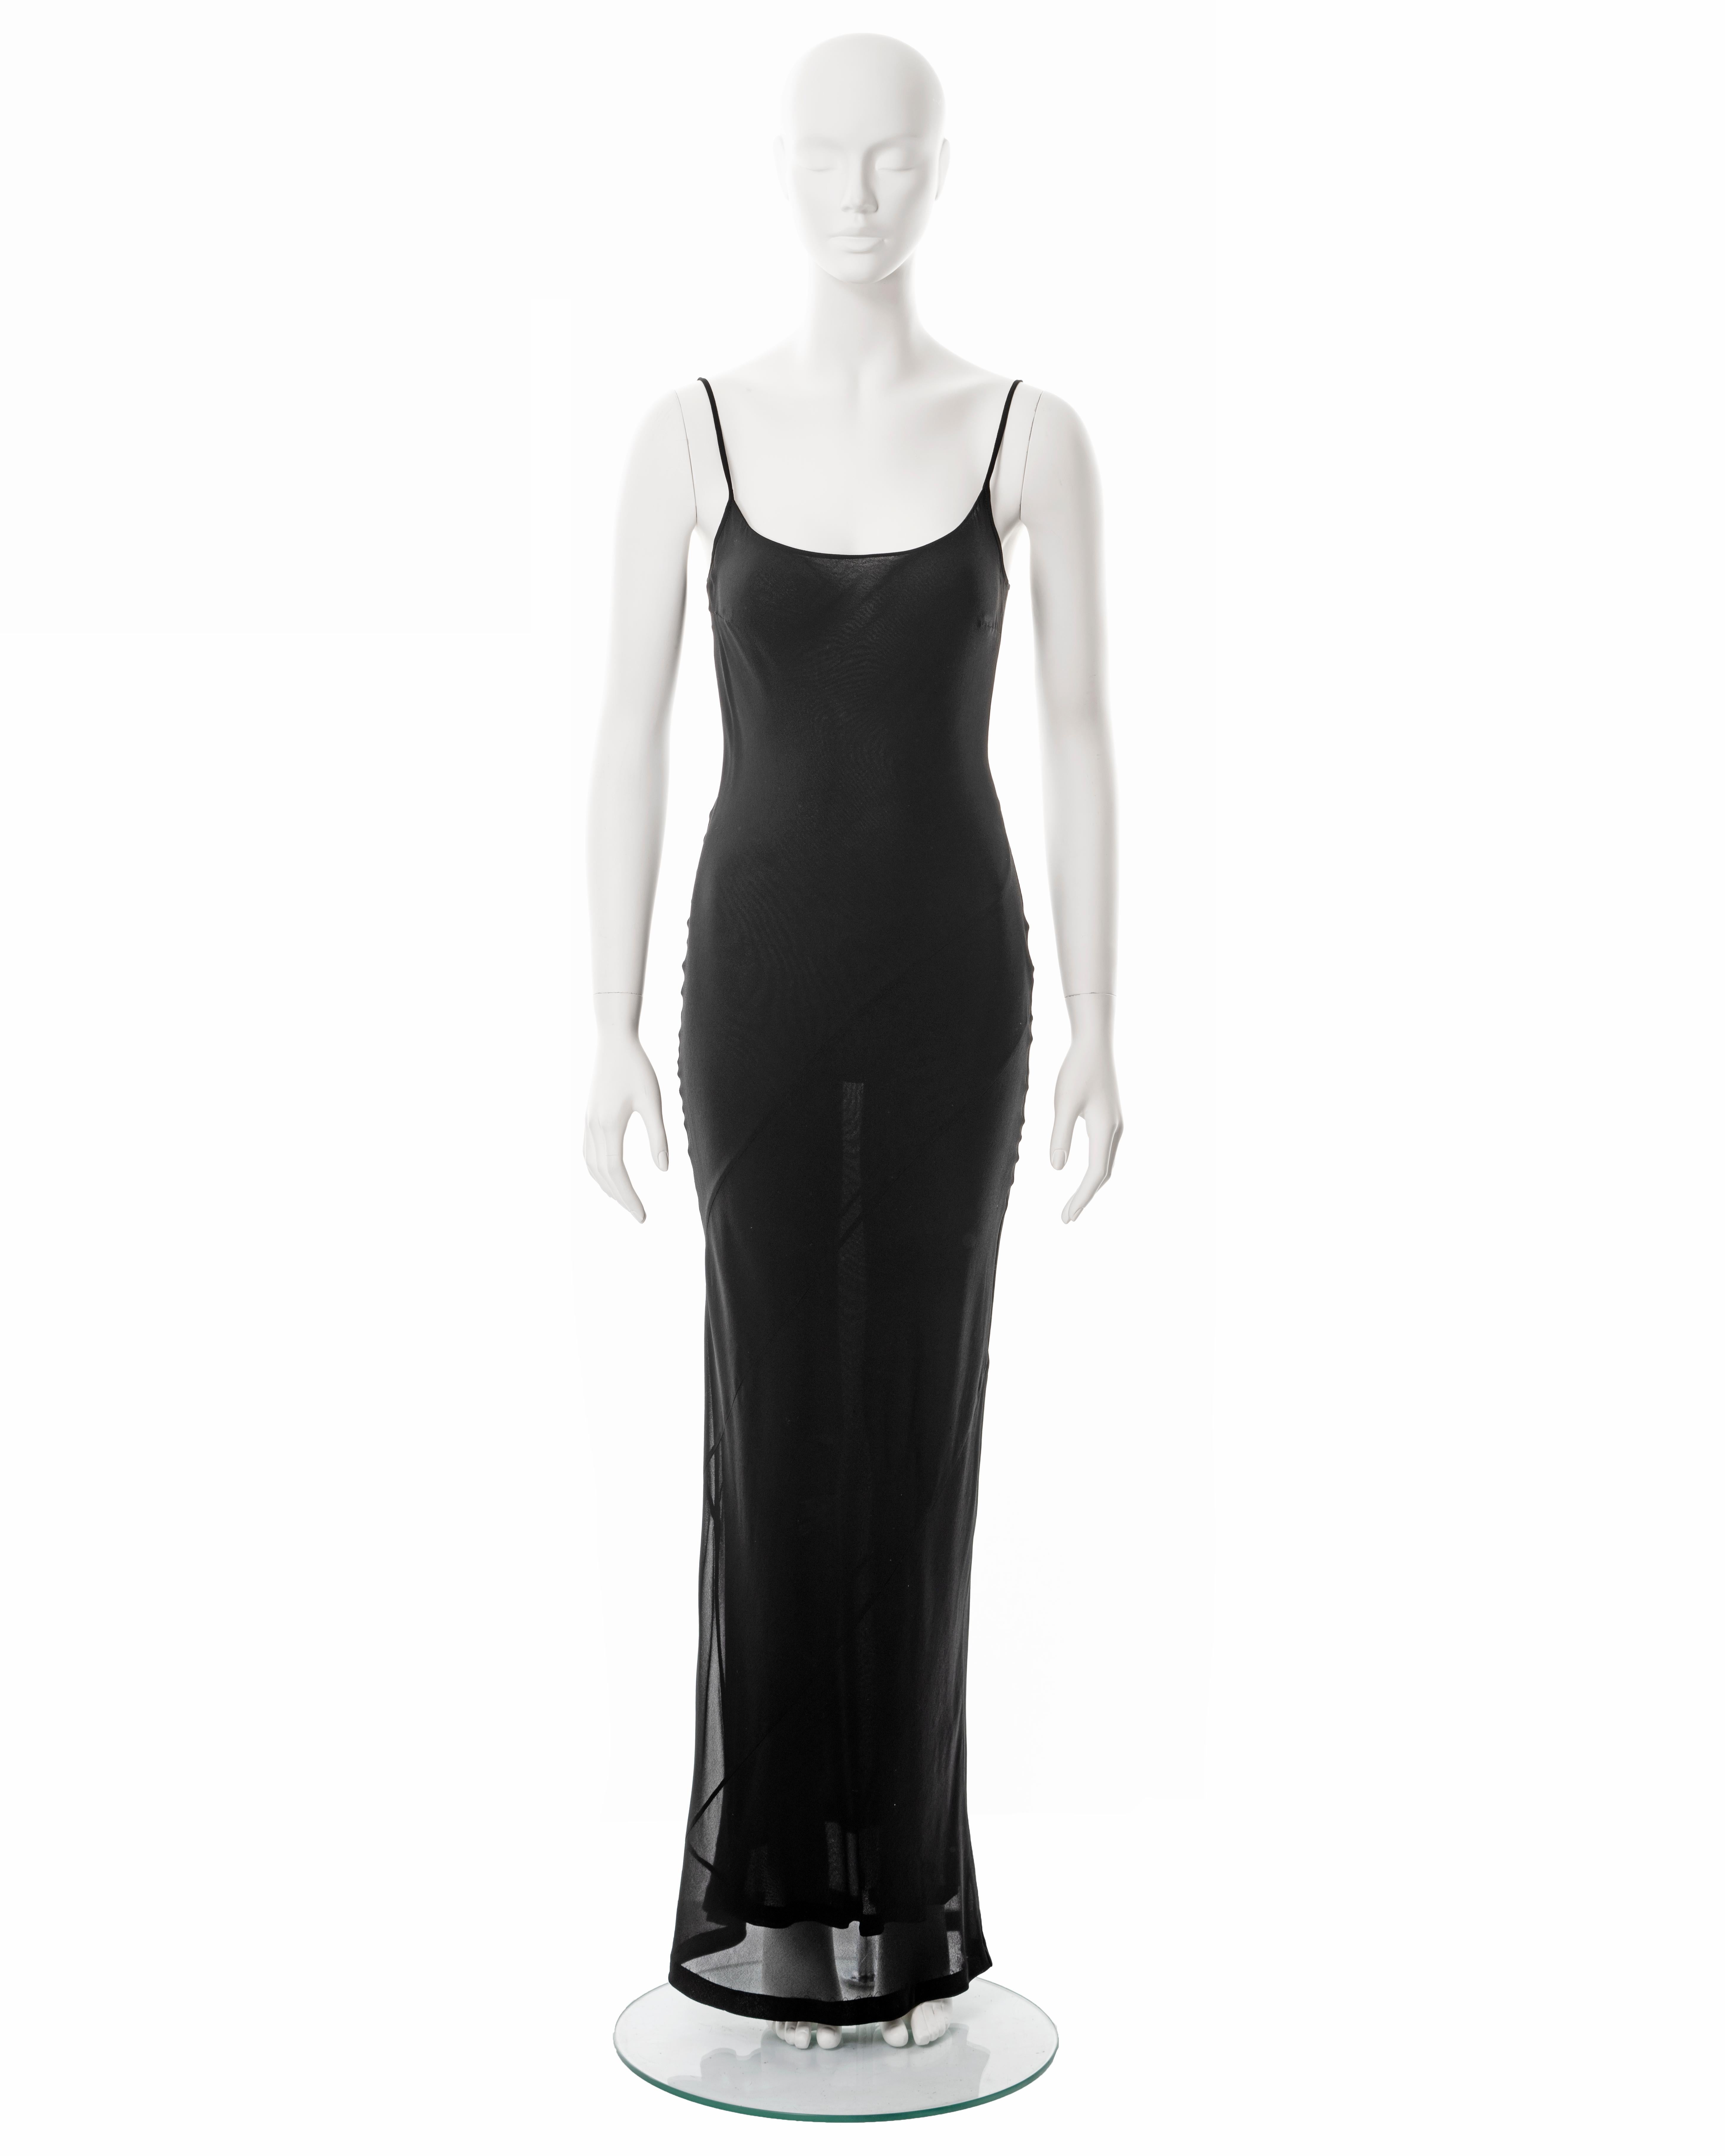 ▪ Gucci black evening slip dress
▪ Designed by Tom Ford
▪ Spring-Summer 1997
▪ Constructed from black bias-cut silk-rayon blend crepe chiffon
▪ Double-layered
▪ Scoop neck
▪ Spaghetti straps 
▪ Floor length skirt 
▪ IT 40 - FR 36 - UK 8
▪ Made in